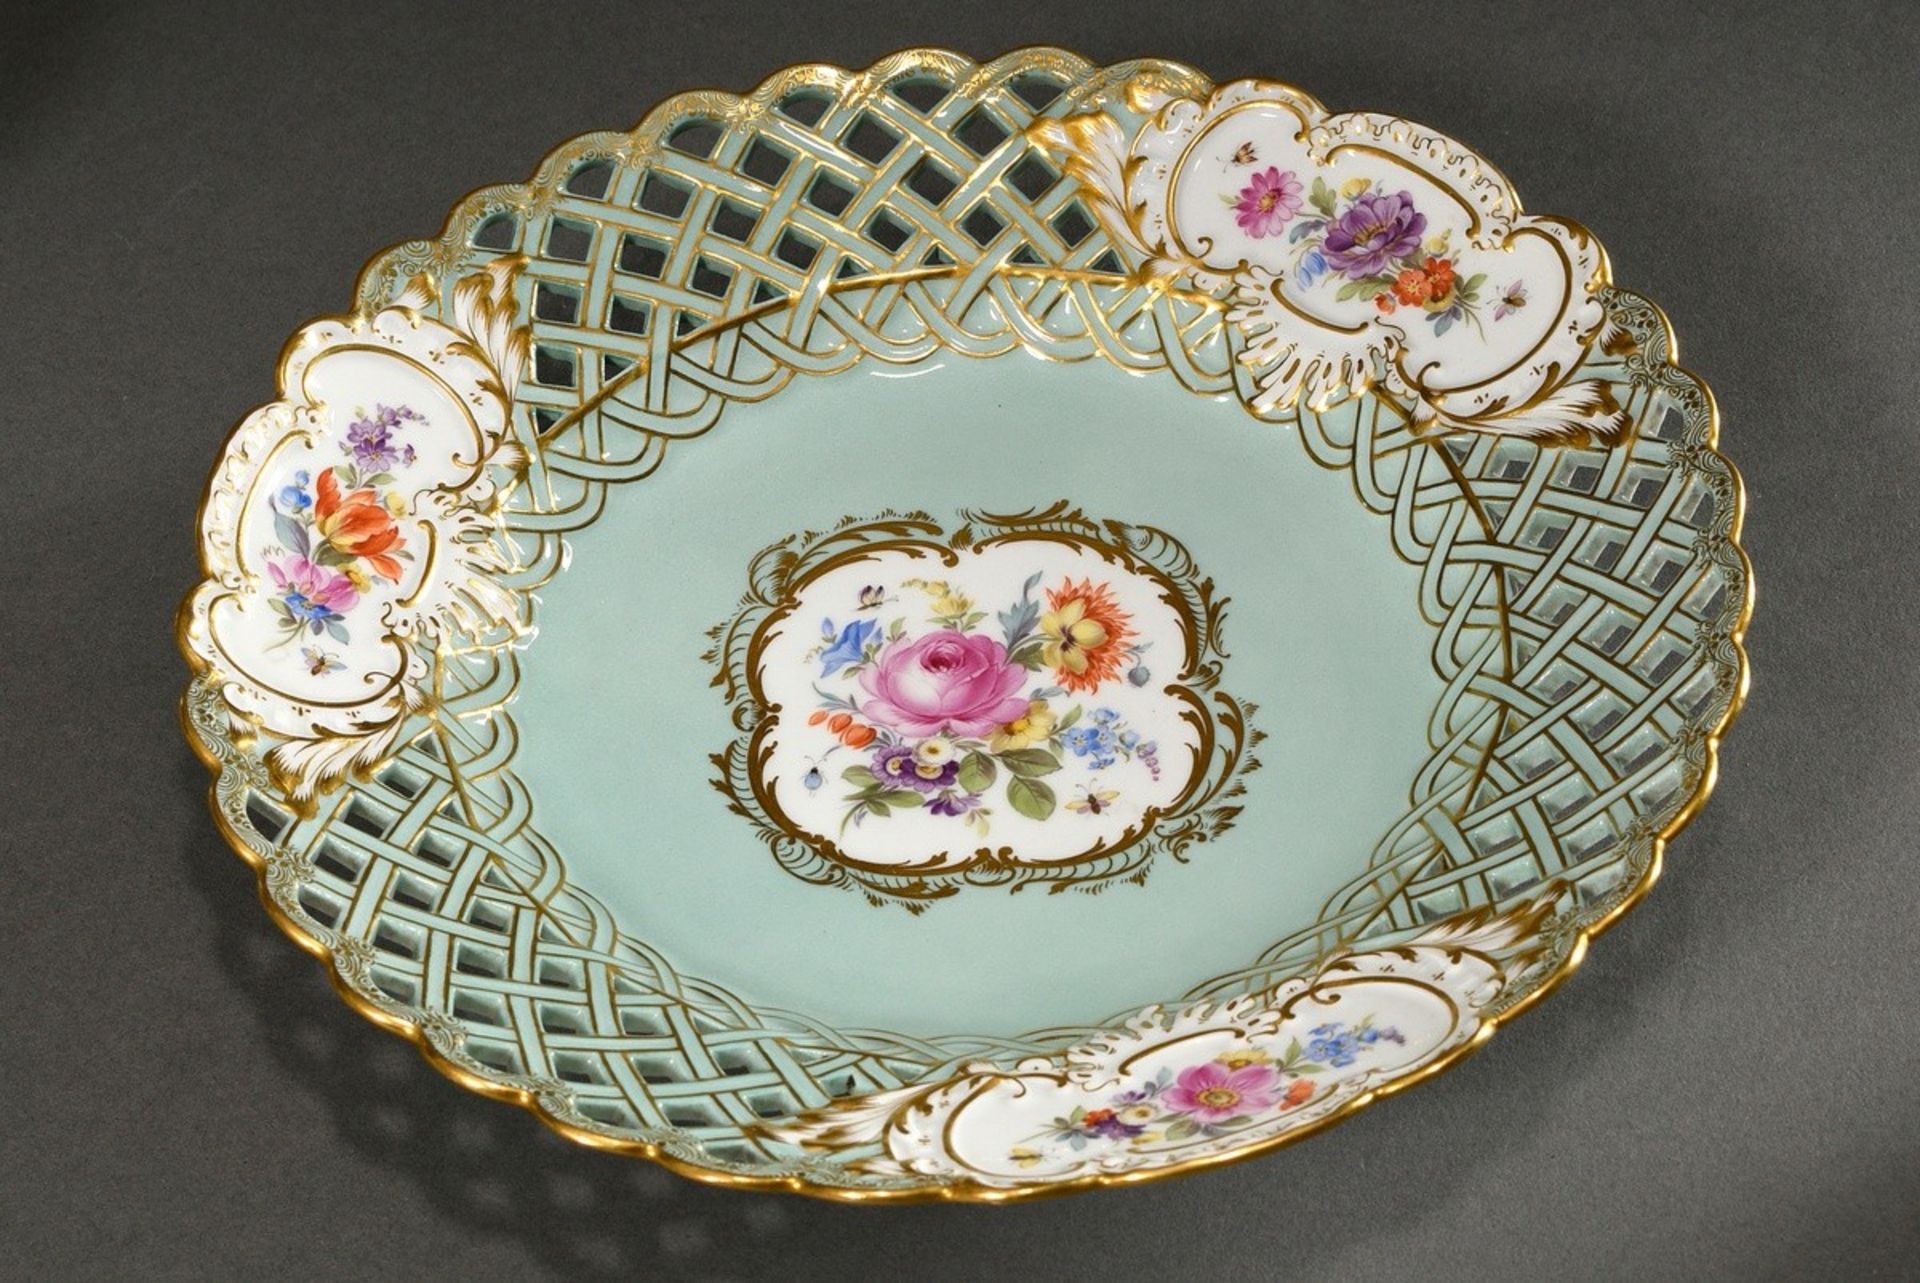 26 pieces Meissen state tea and coffee service for 10 persons with polychrome floral painting in go - Image 7 of 7